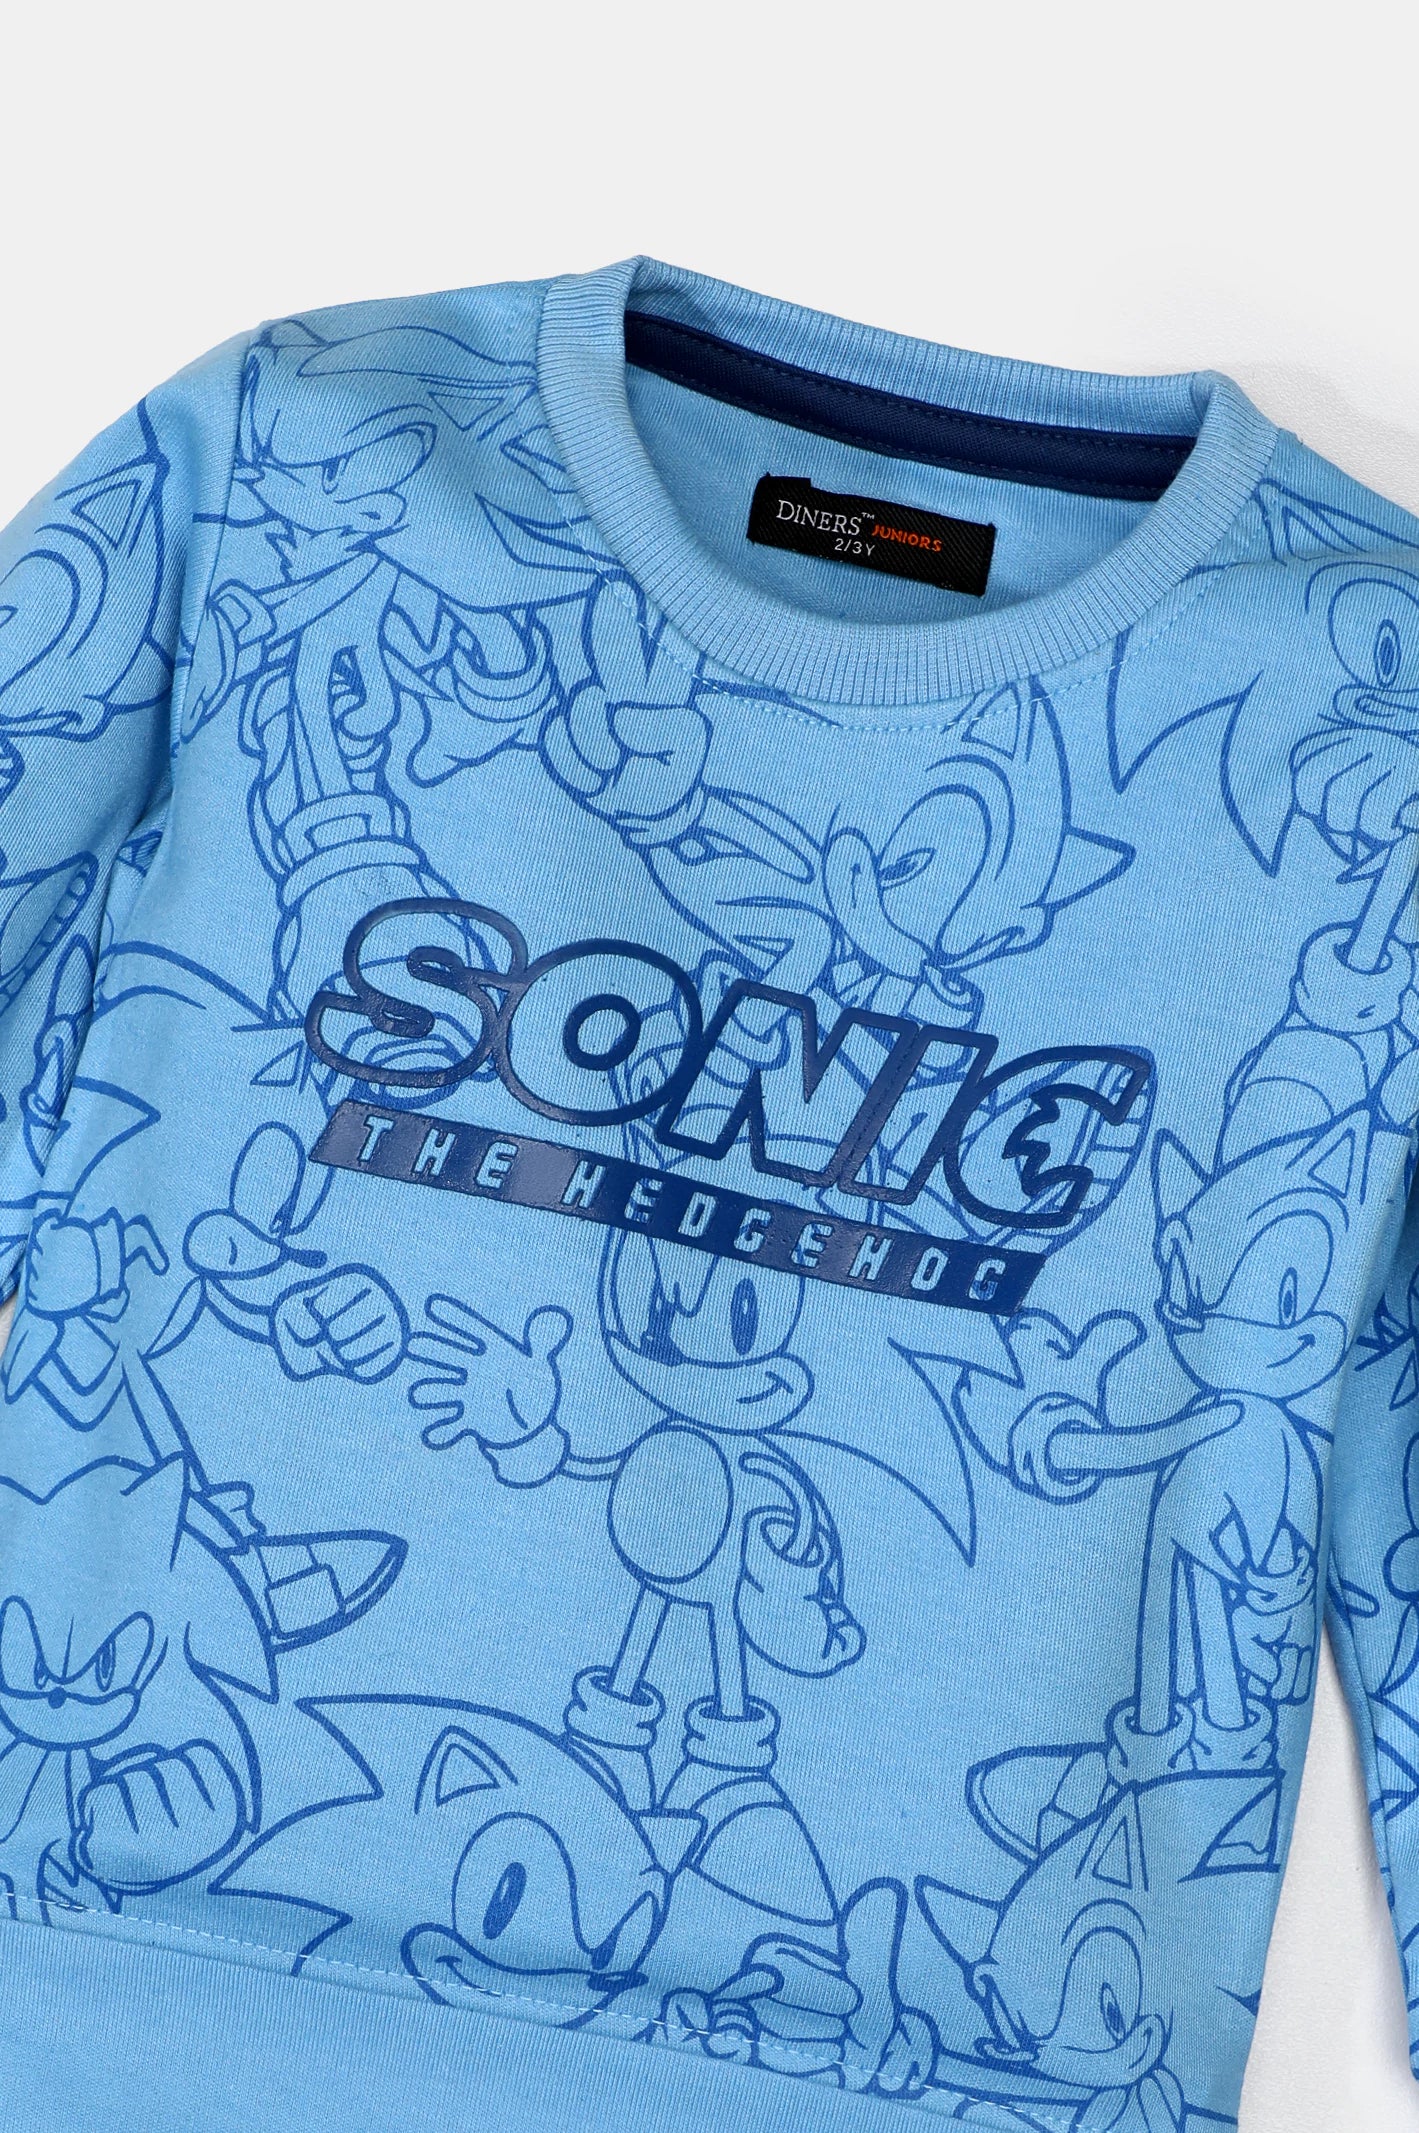 Blue Sonic Printed Boys Sweatshirt From Diners